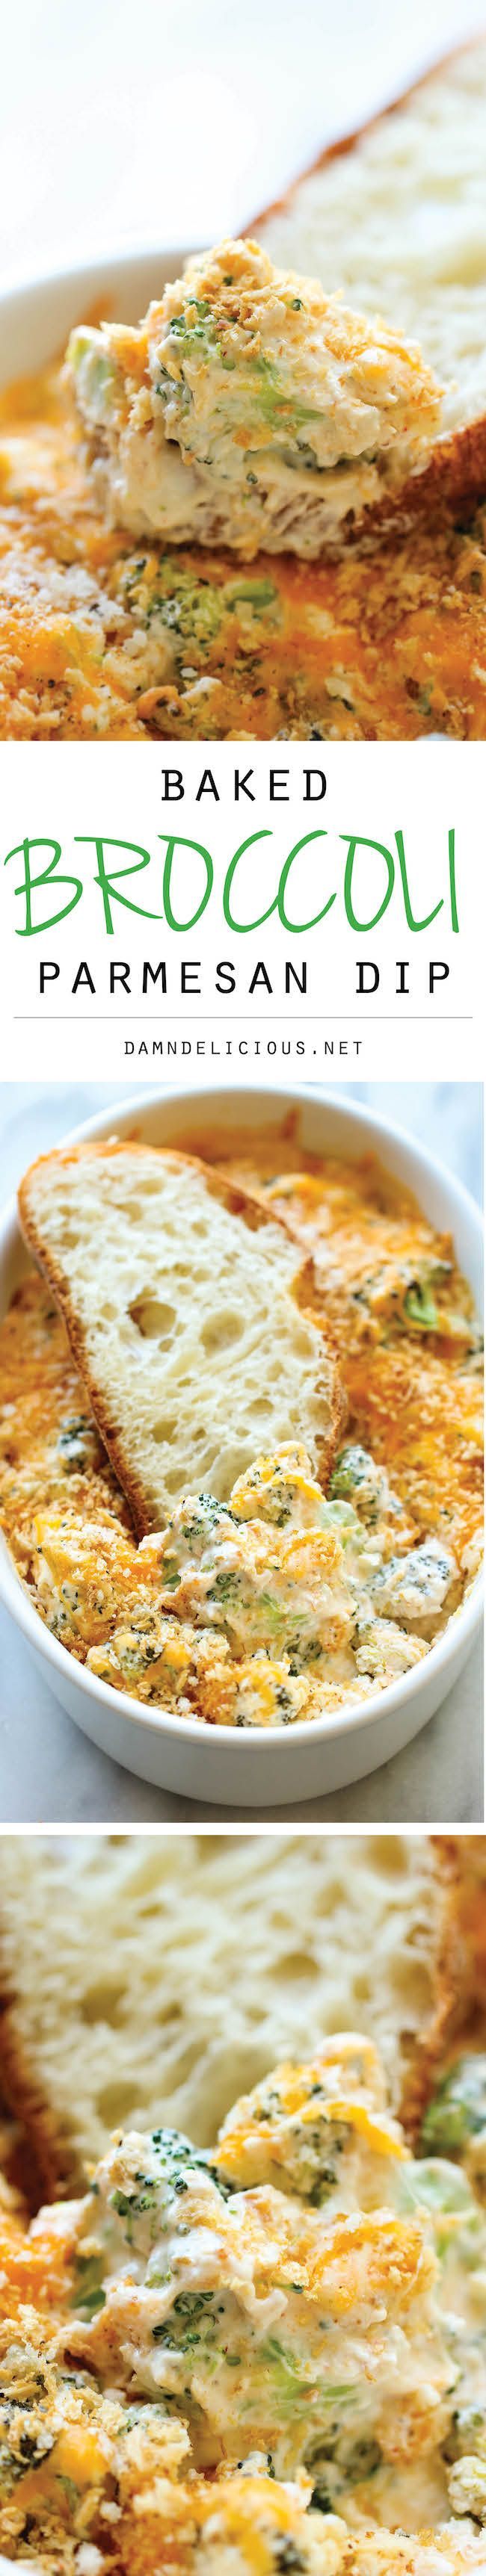 Baked Broccoli Parmesan Dip: A wonderfully hot and cheesy broccoli dip that is sure to be a crowd pleaser – people will be